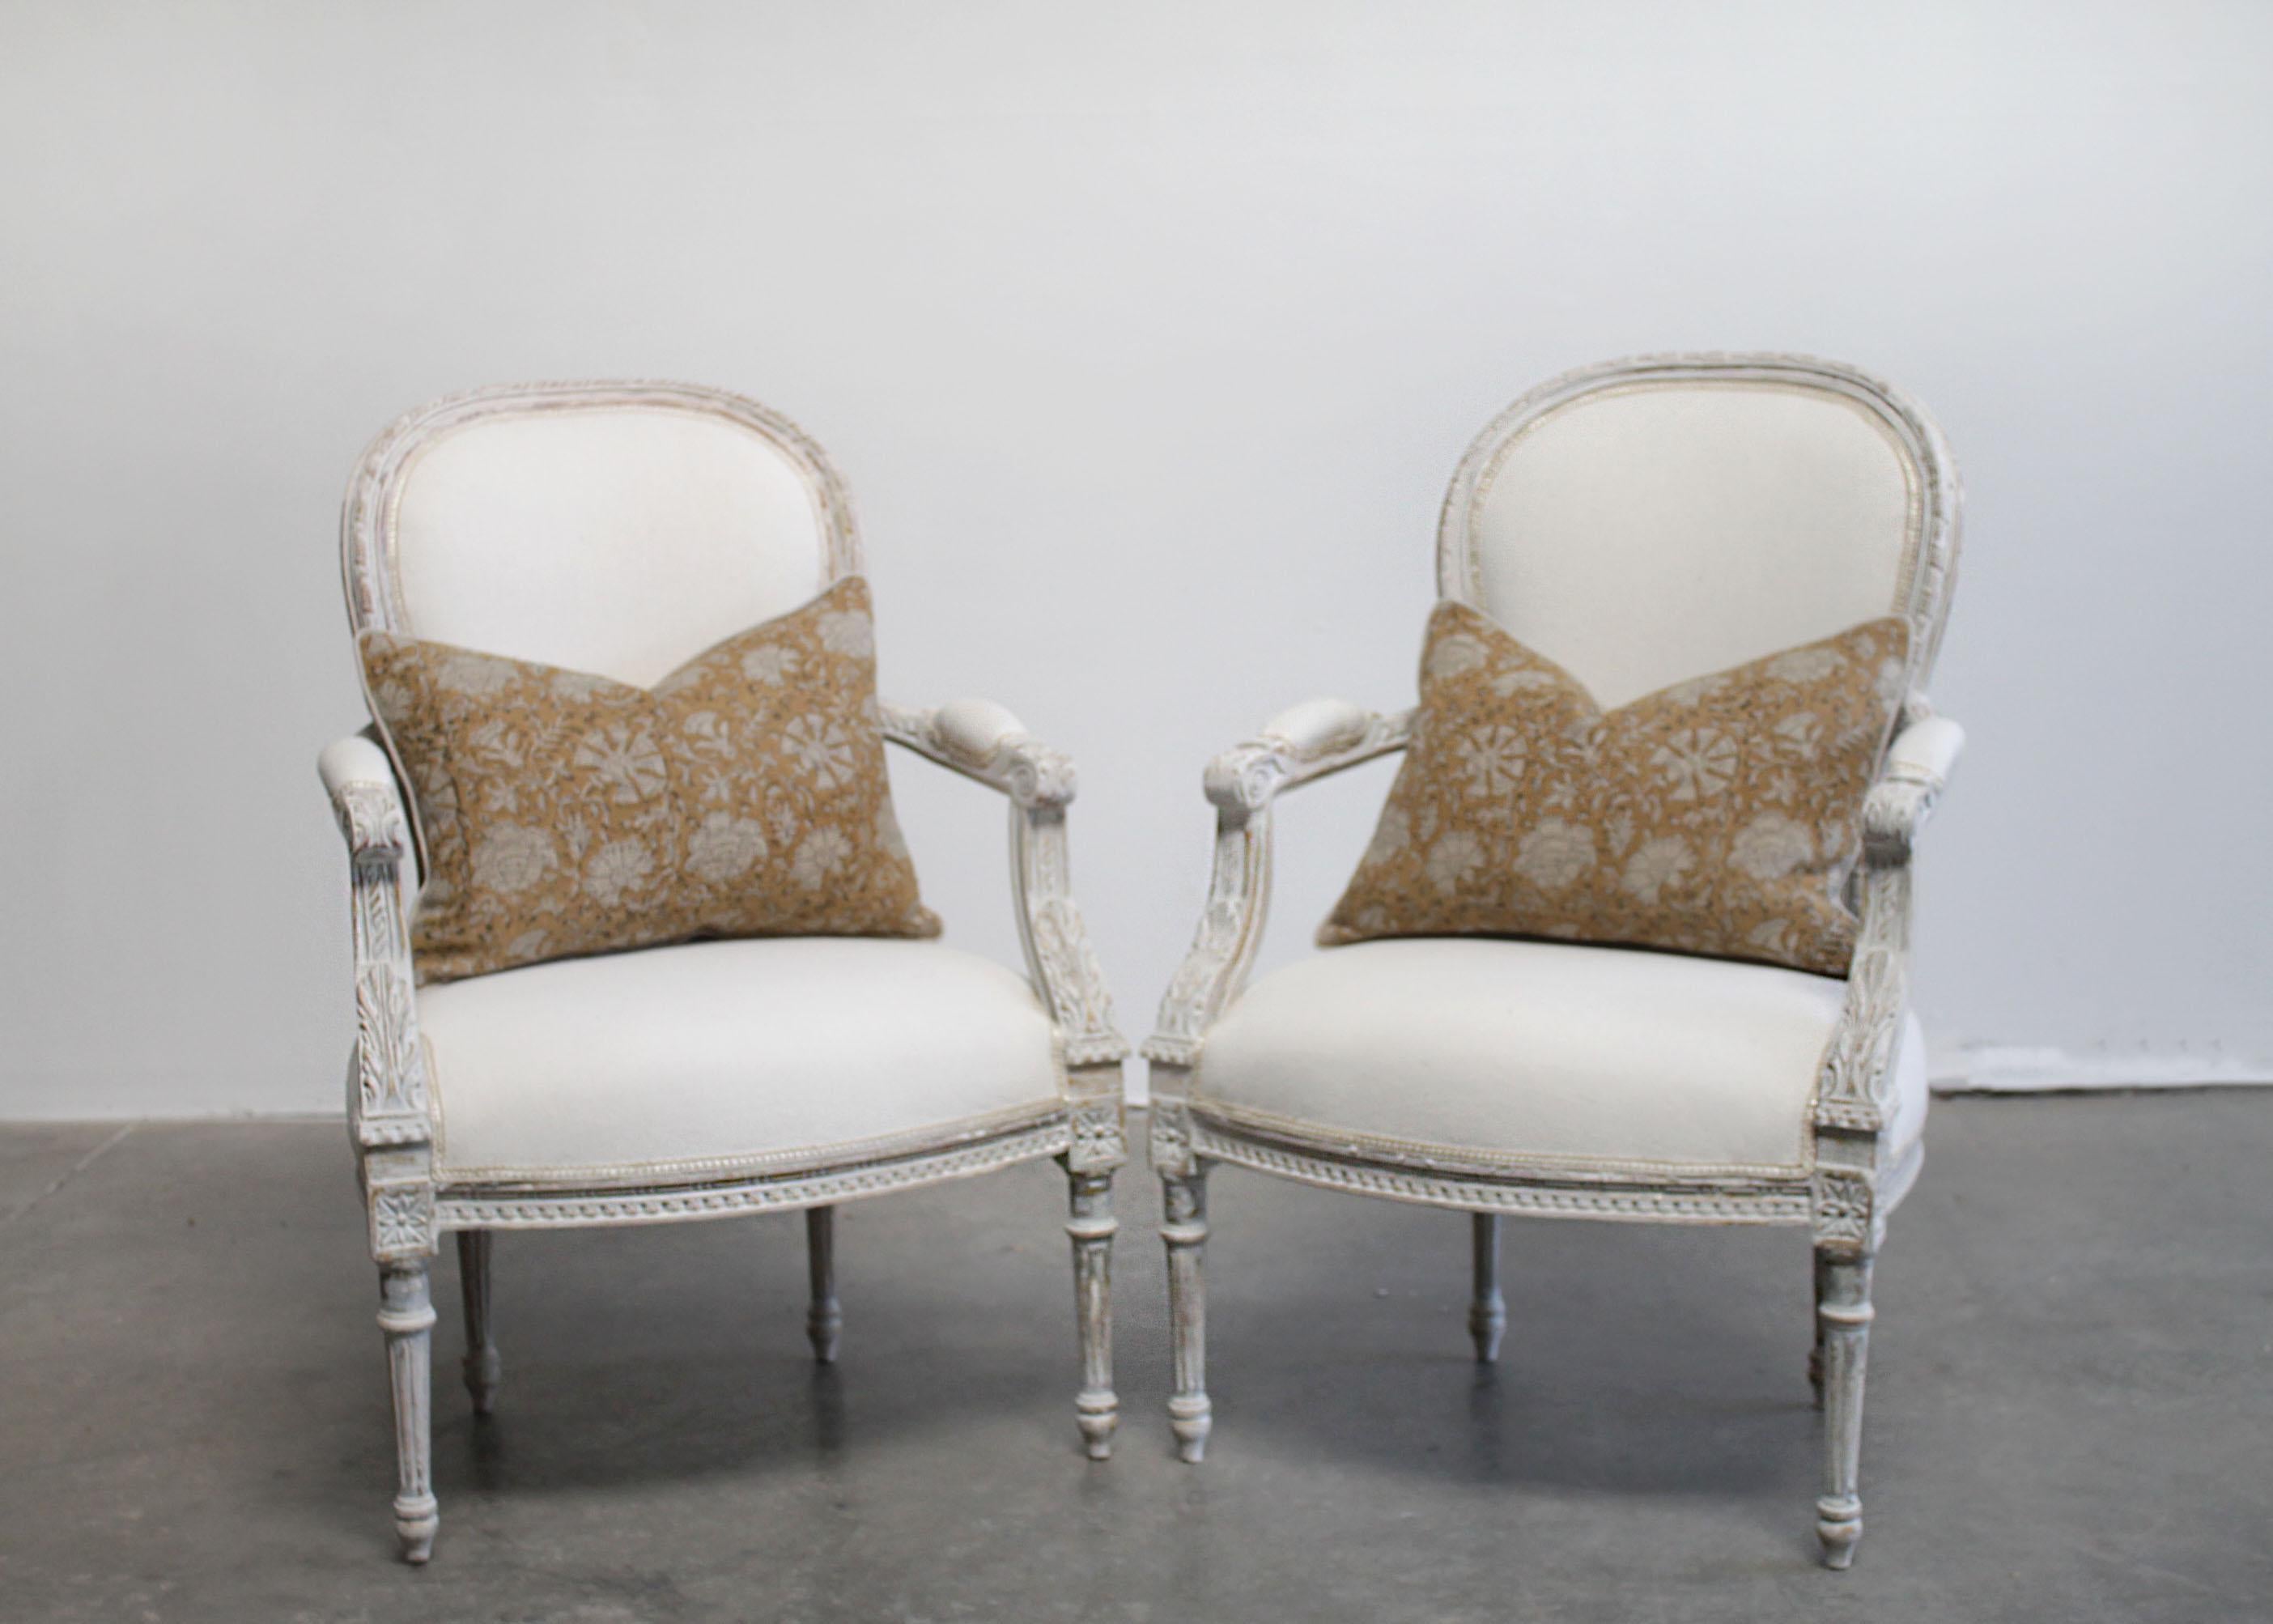 Antique Louis XVI style painted and upholstered carved open armchairs
Painted in a pretty Gustavian gray finish with subtle distressed edges, and wood peeking through the paint.
Classic fluted legs, with medallion carvings atop the leg.
Size: 25